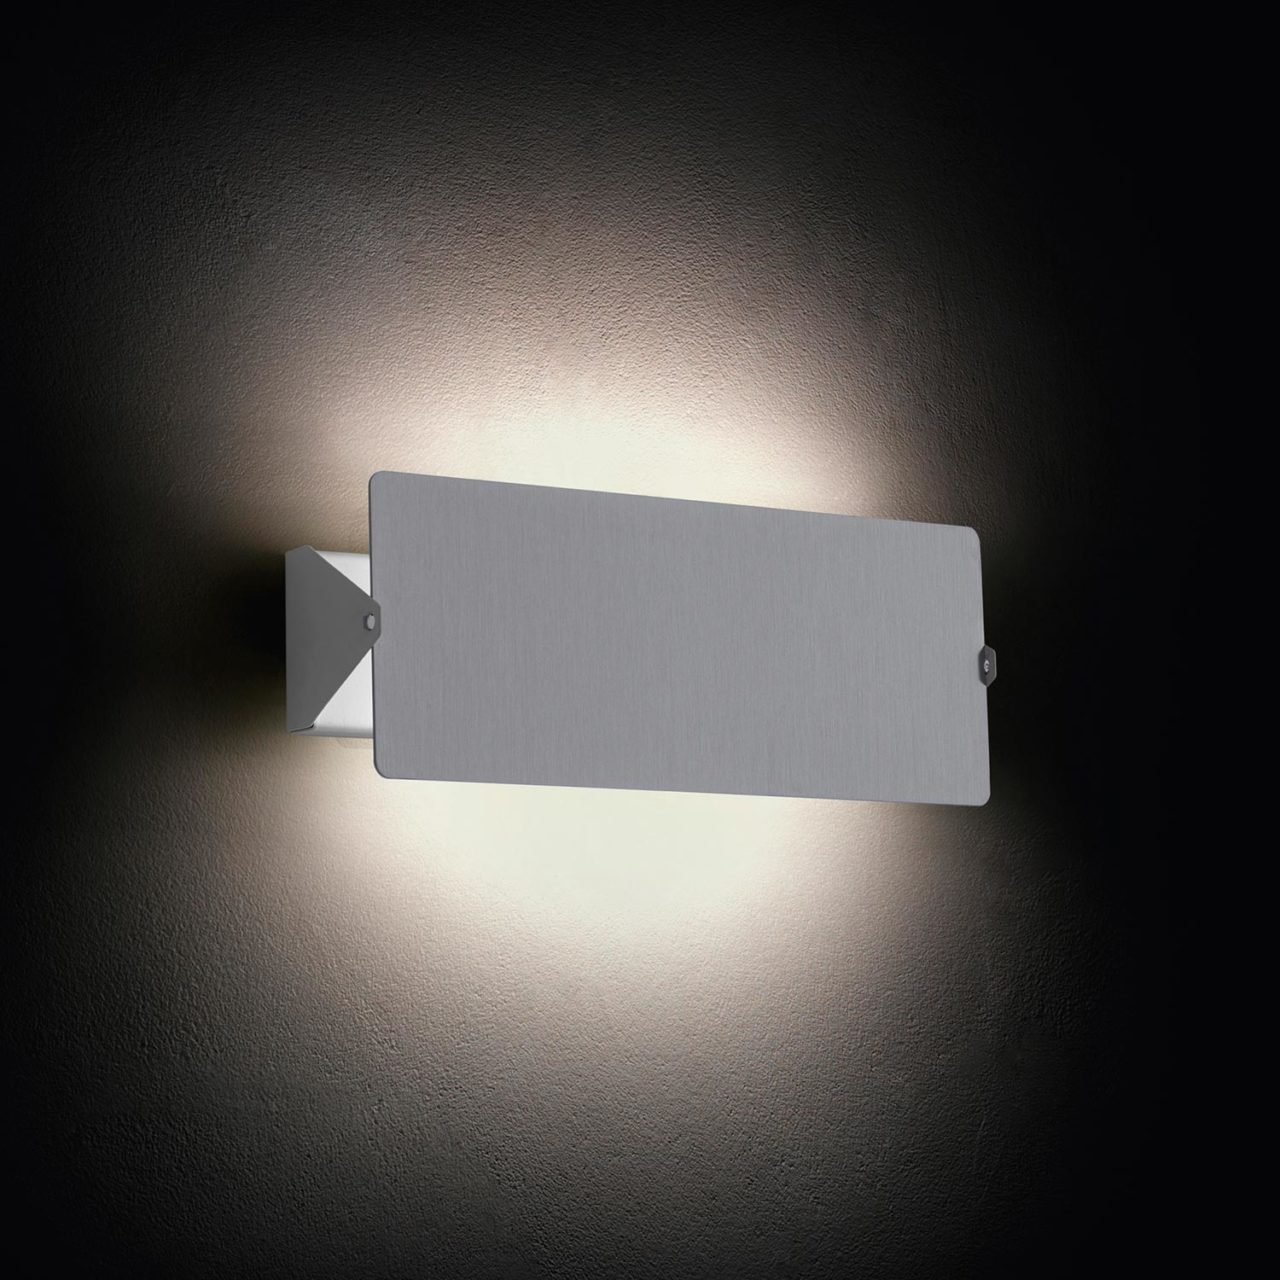 Wall lamp design for a black wall online india